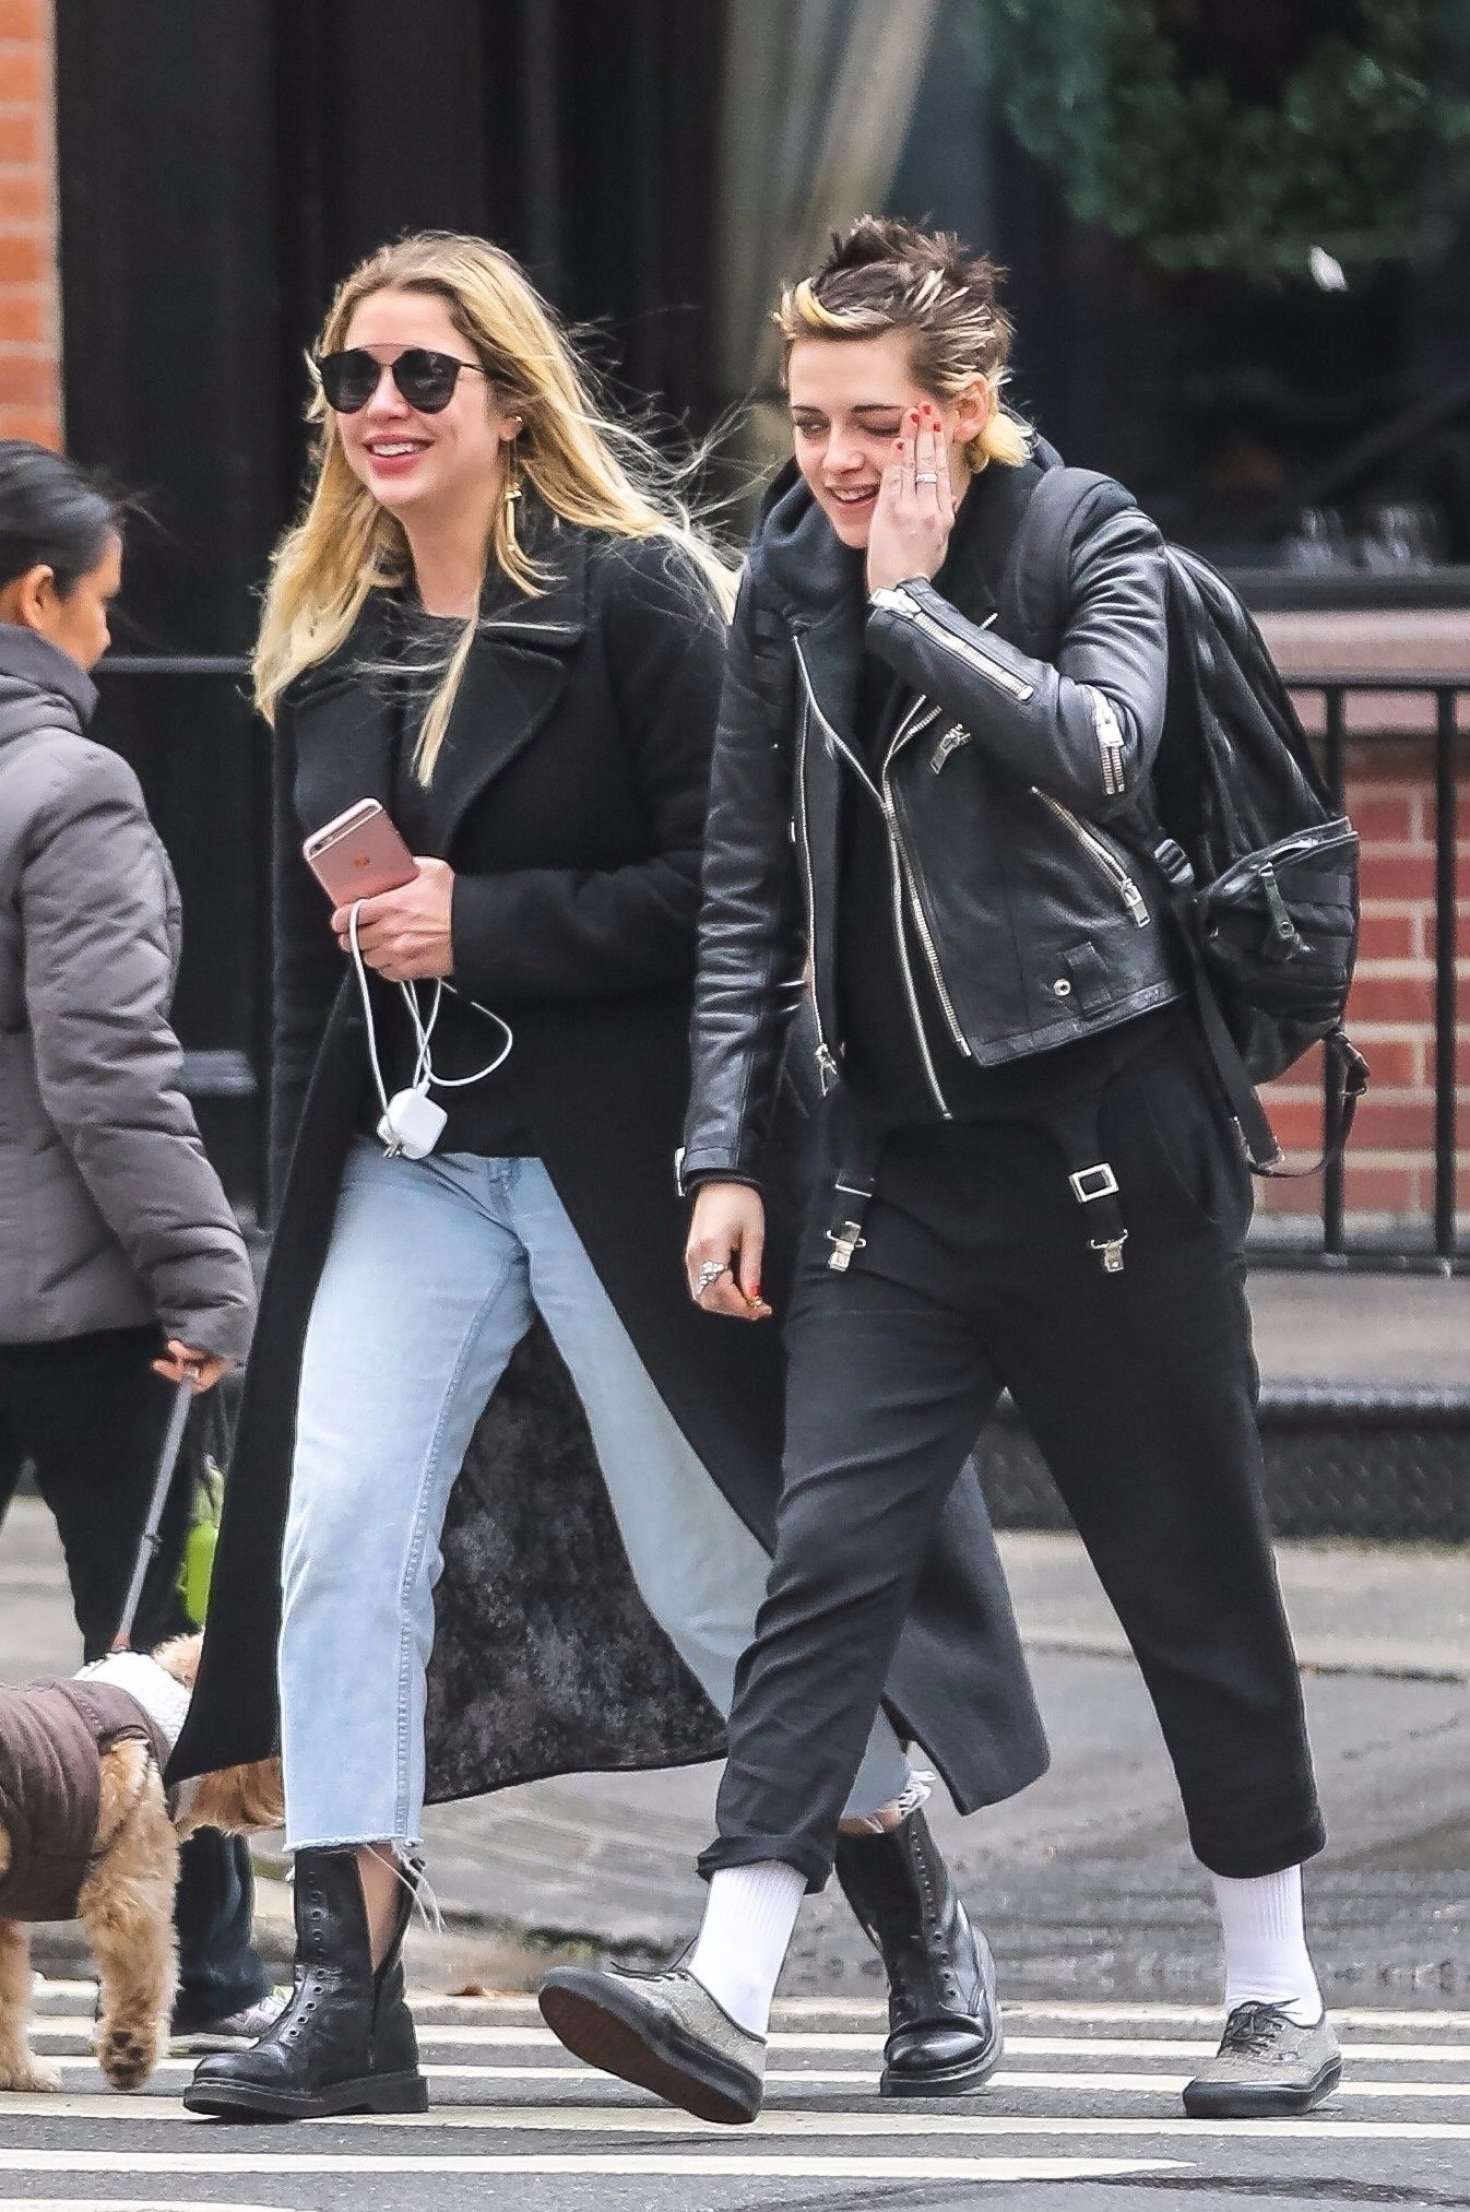 Ashley Benson and Kristen Stewart out together in NYC -42 – GotCeleb